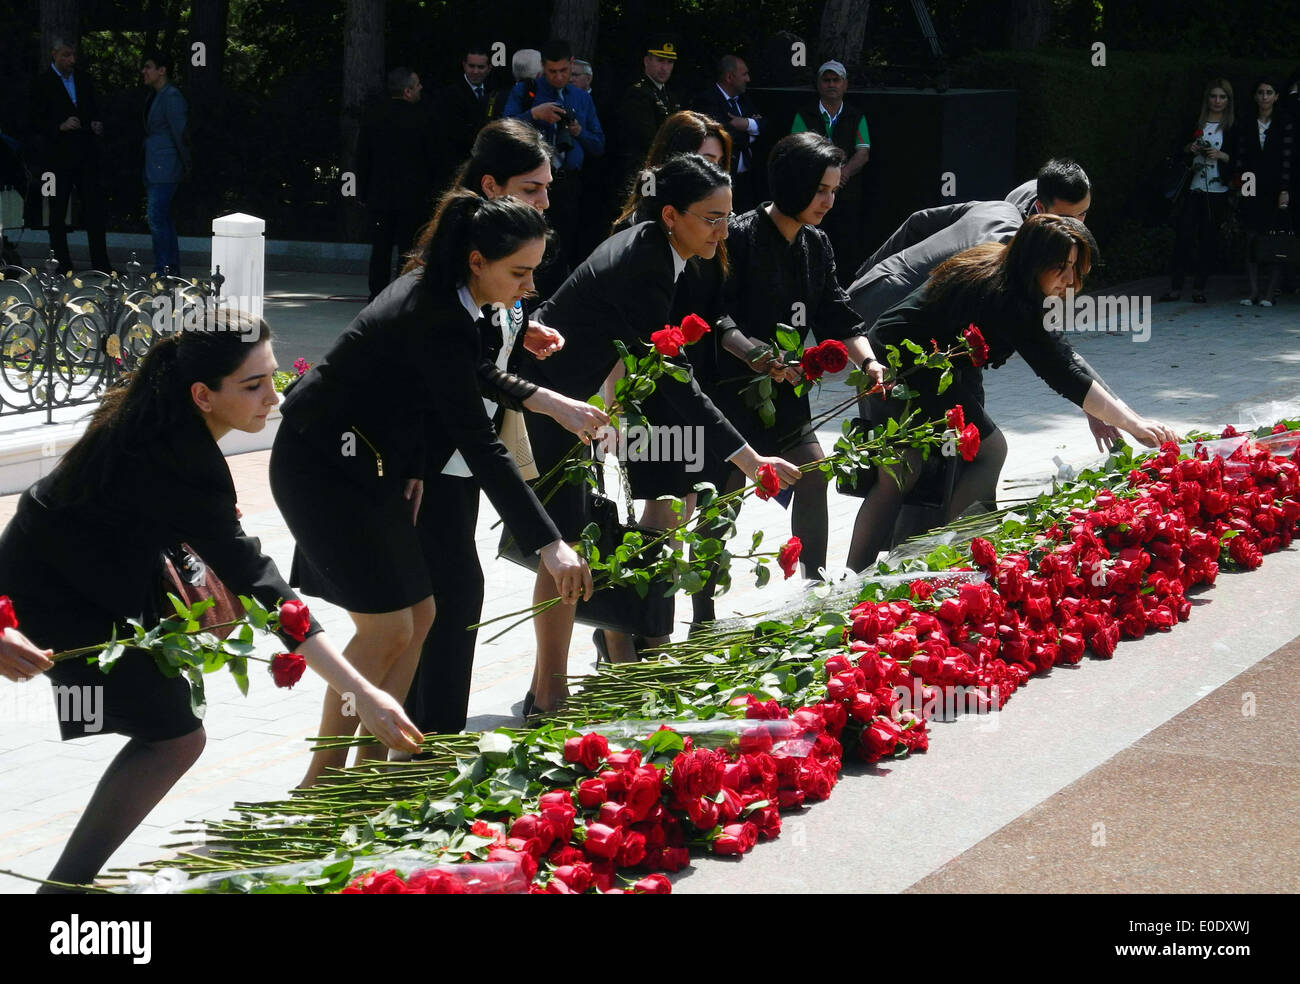 Baku. 10th May, 2014. Azerbaijani women lay flowers to the late national leader Heydar Aliyev at the memorial in Azerbaijan's capital Baku on May 10, 2014. Azerbaijan commemorated the 91st anniversary of the birth of the country's late national leader Heydar Aliyev on Saturday. Credit:  Tofik Babayev/Xinhua/Alamy Live News Stock Photo